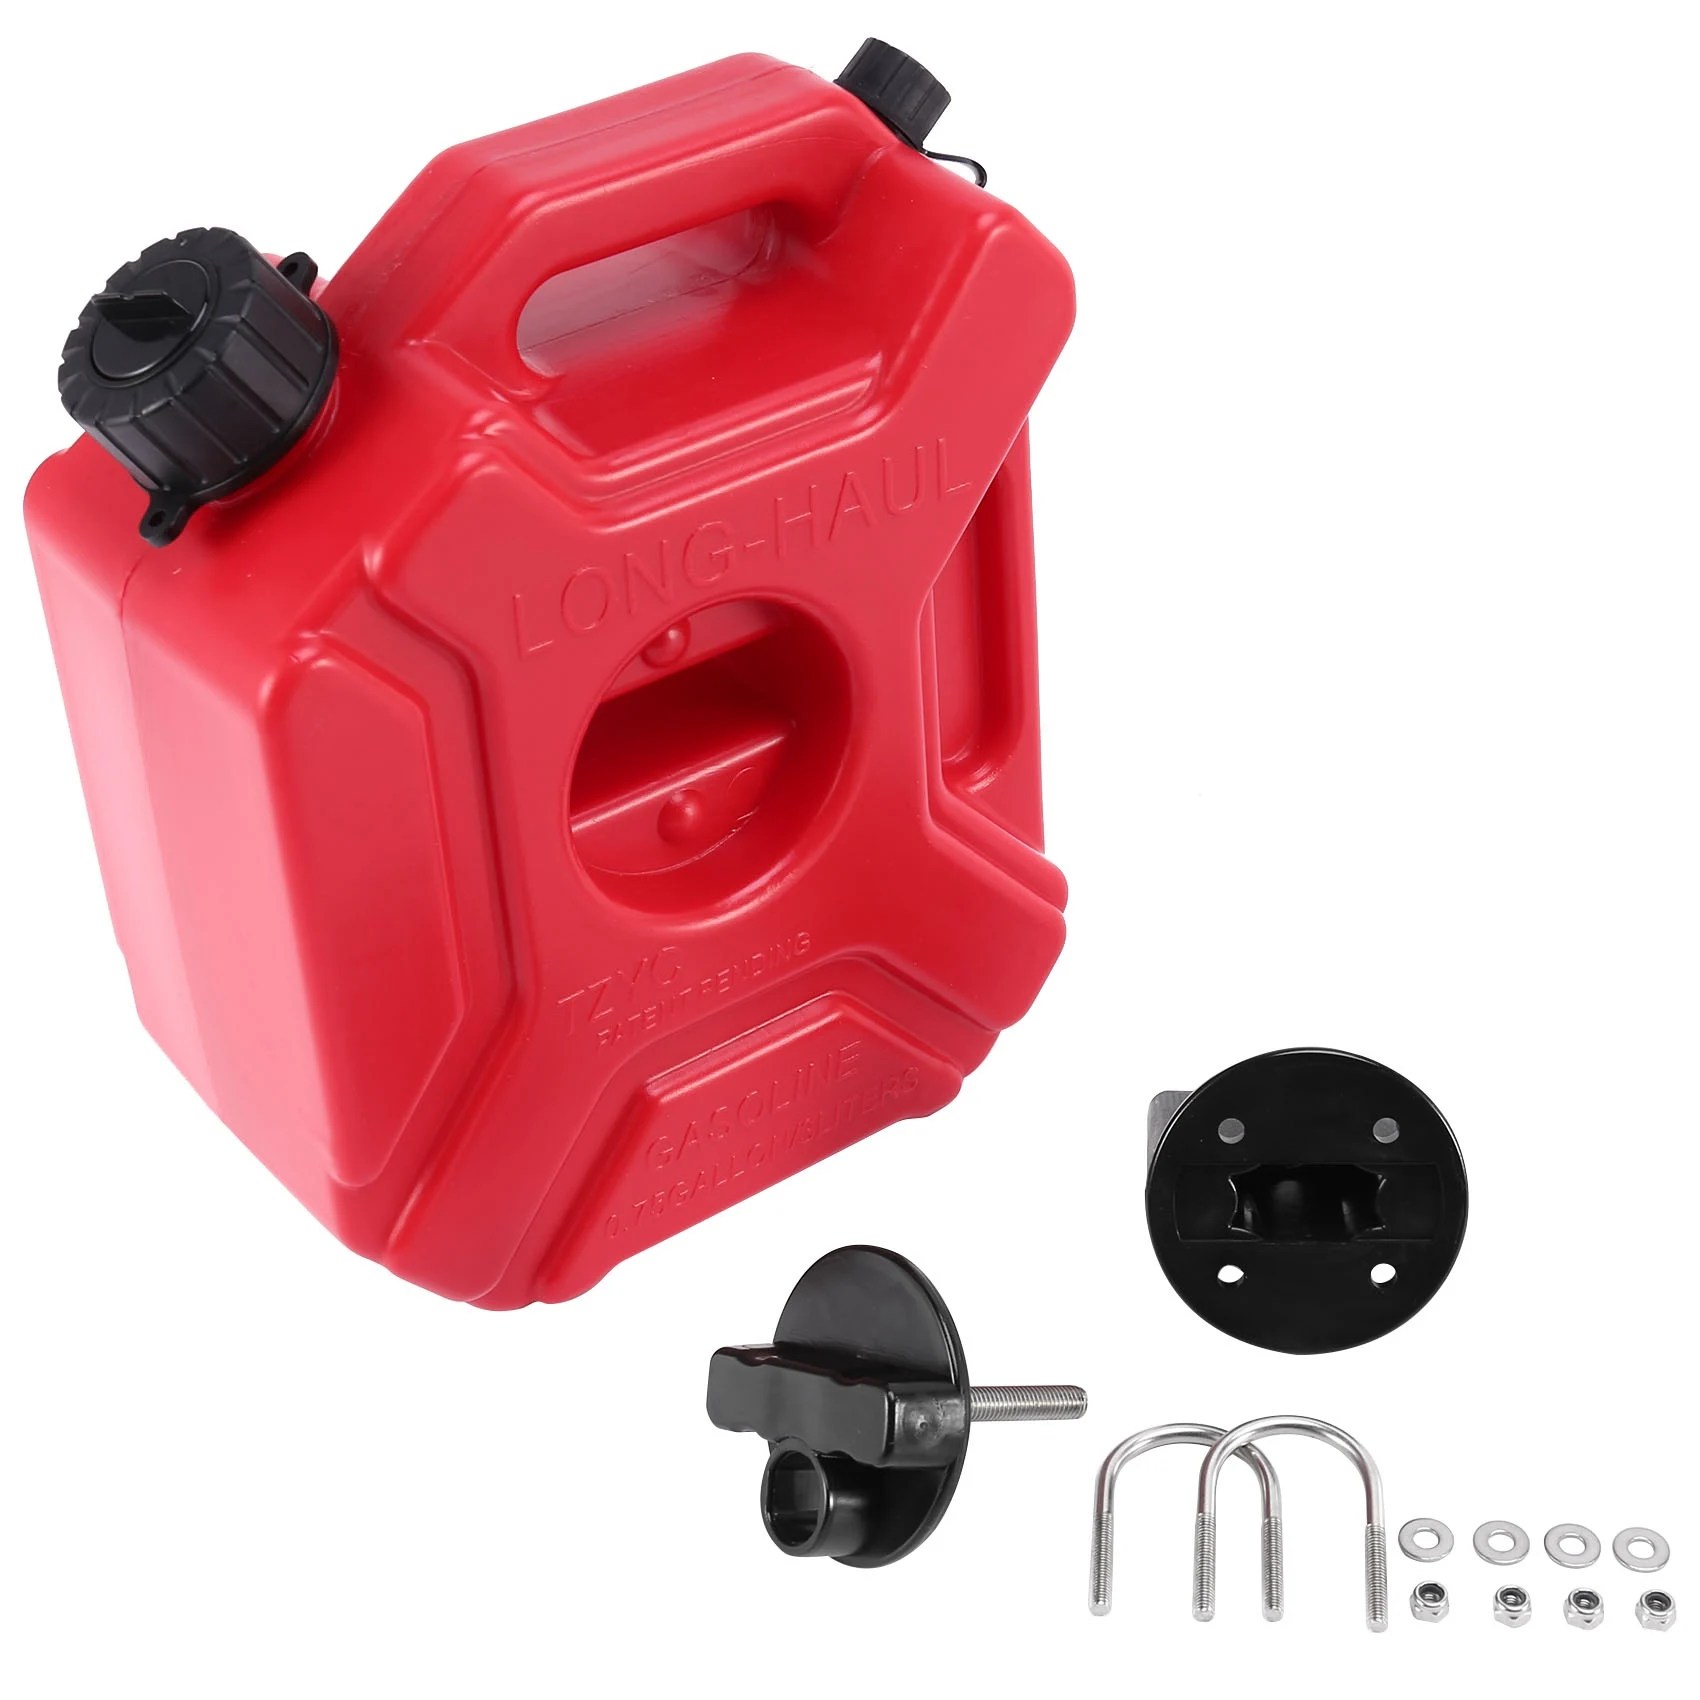 

3 Litres Fuel Tank Plastic Spare Petrol Tanks Cans Gasoline Oil Container Fuel-Jugs For Motorcycle Atv